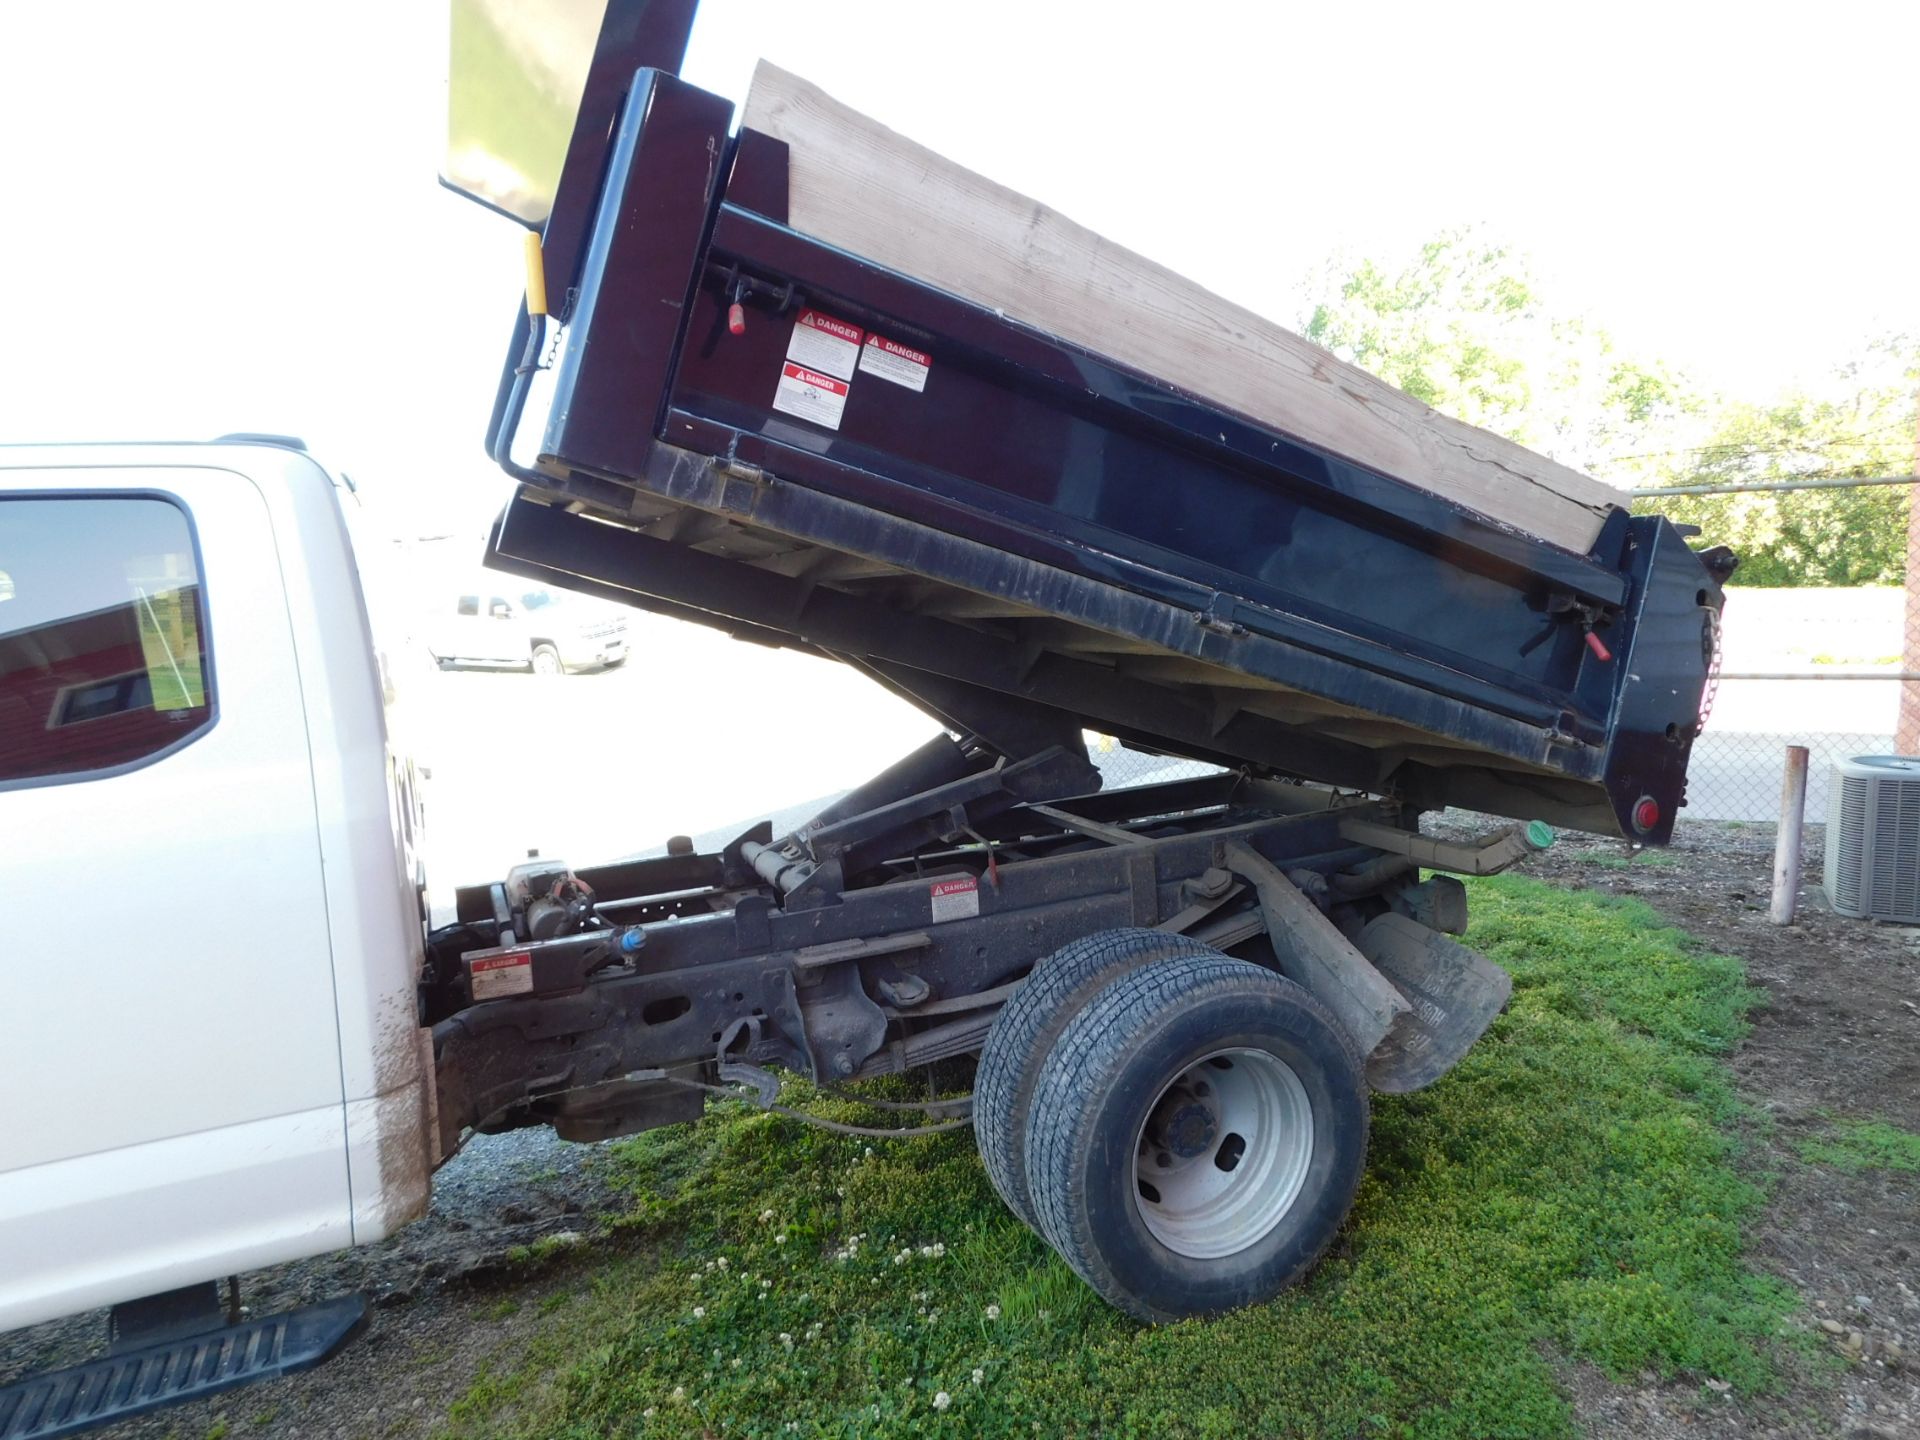 2020 Ford F-350XL Single Axle Dump Truck vin 1FD8X3HT6LEE89344, 6.7 Diesel Engine, Automatic - Image 46 of 56